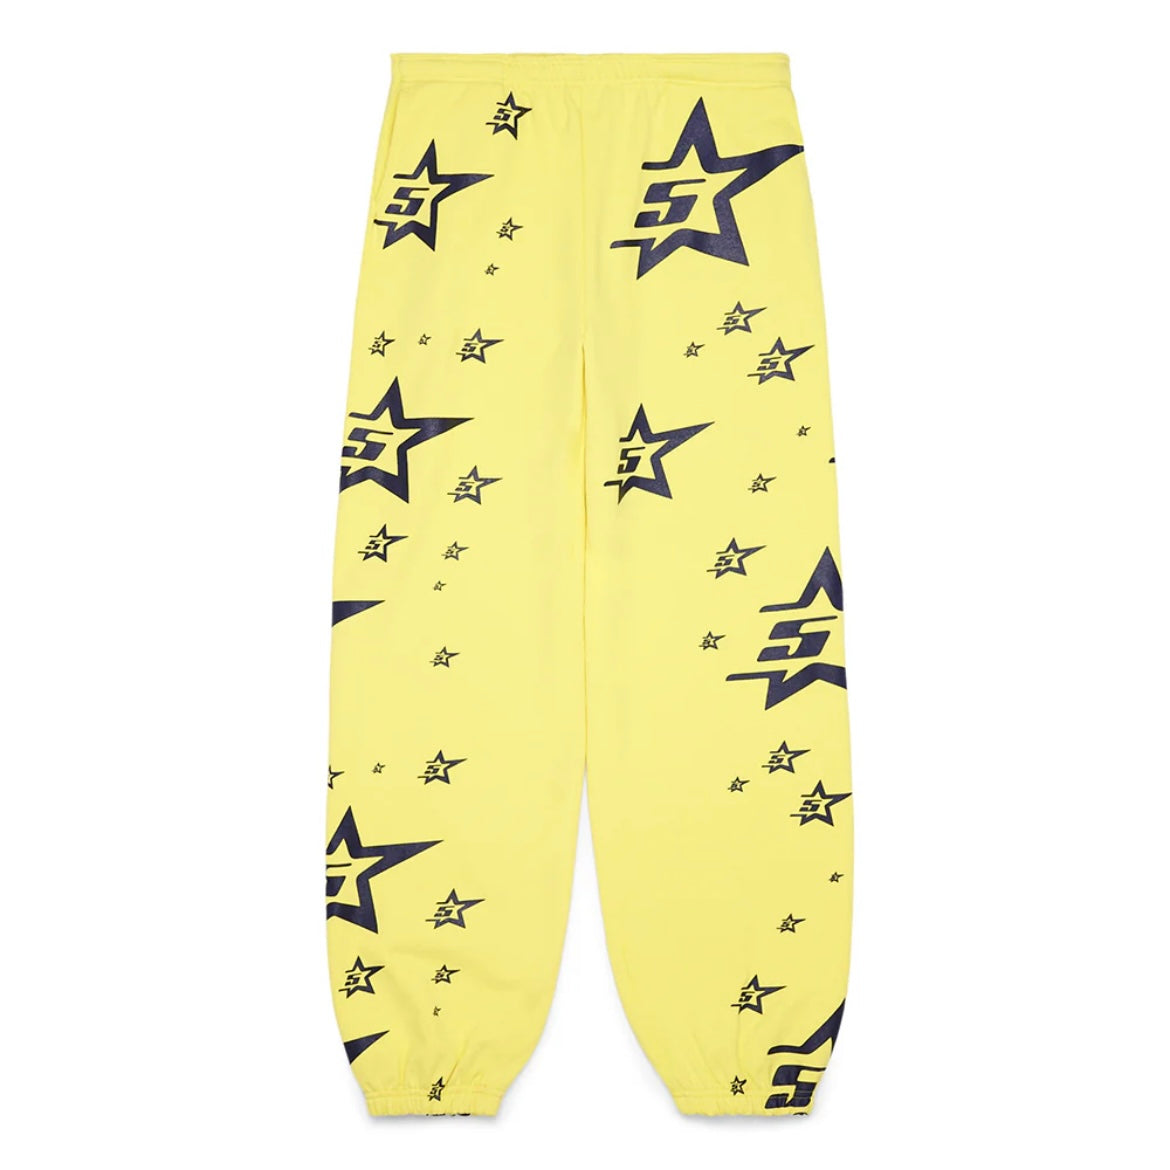 Sp5der Yellow 5Star Sweatpants Front View